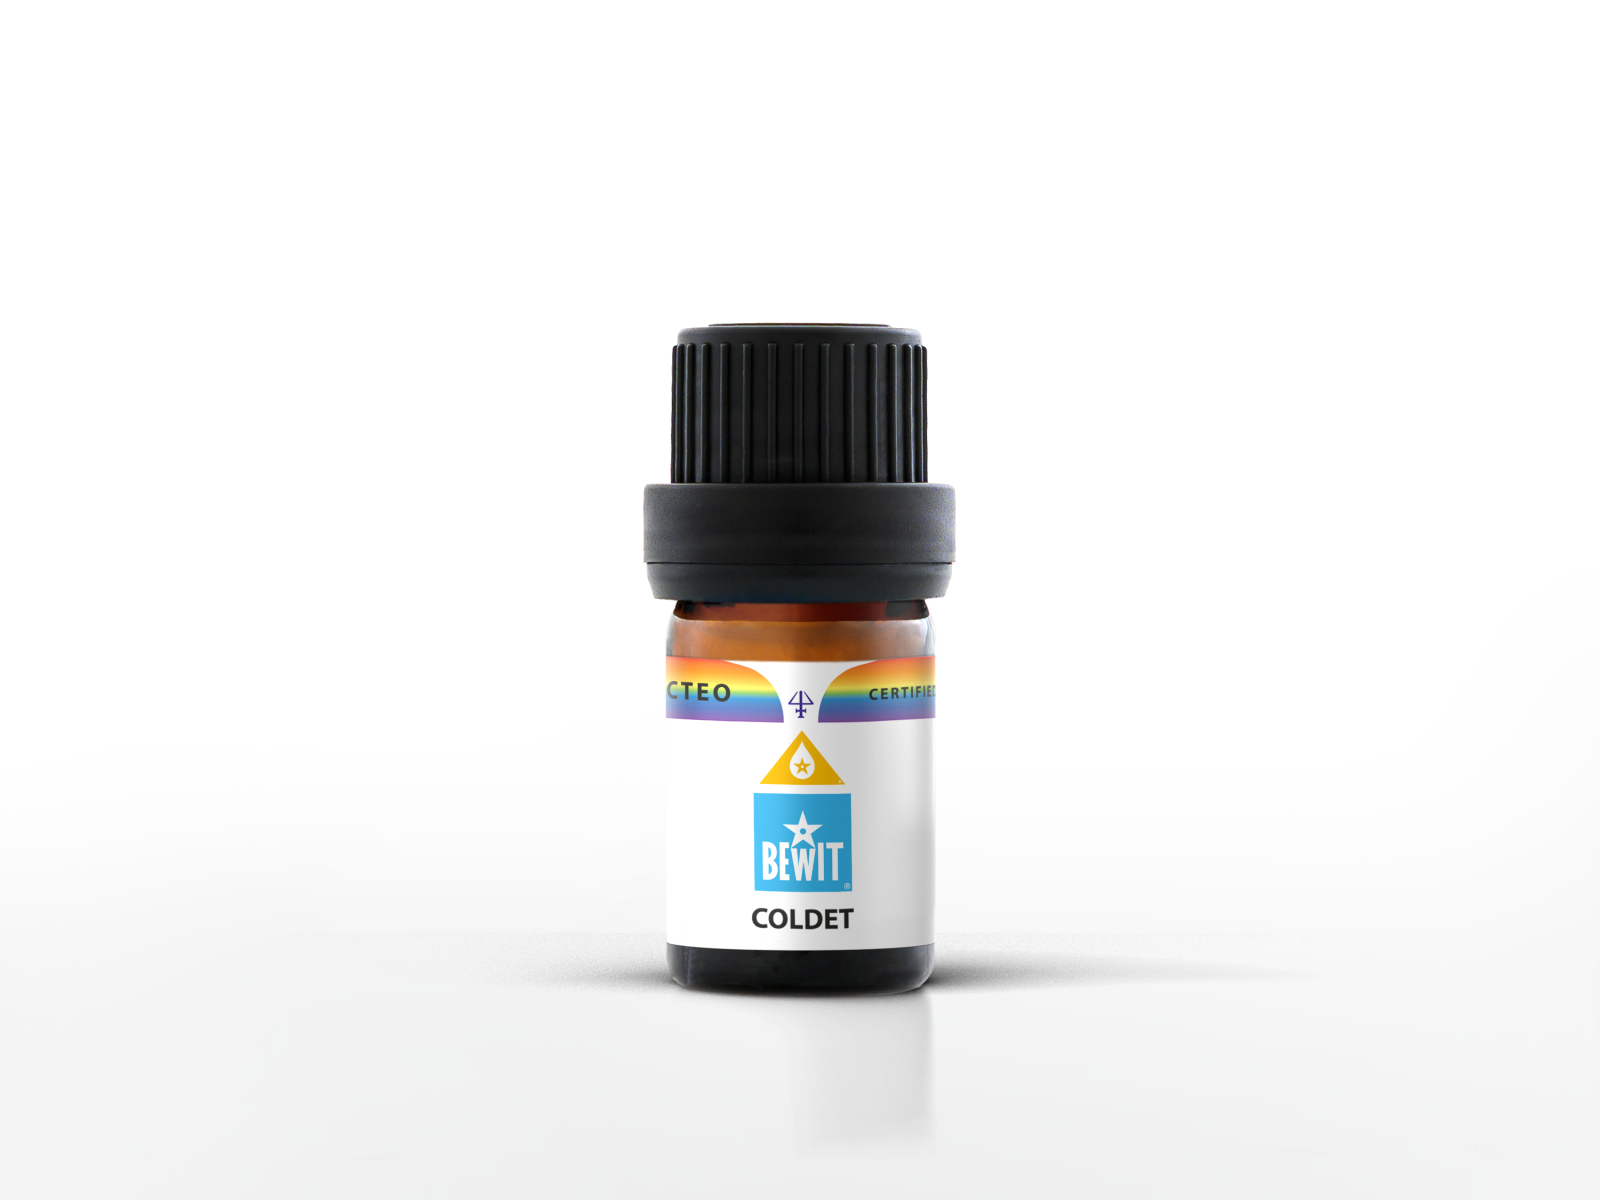 BEWIT COLDET - This is a blend of pure essential oils - 2